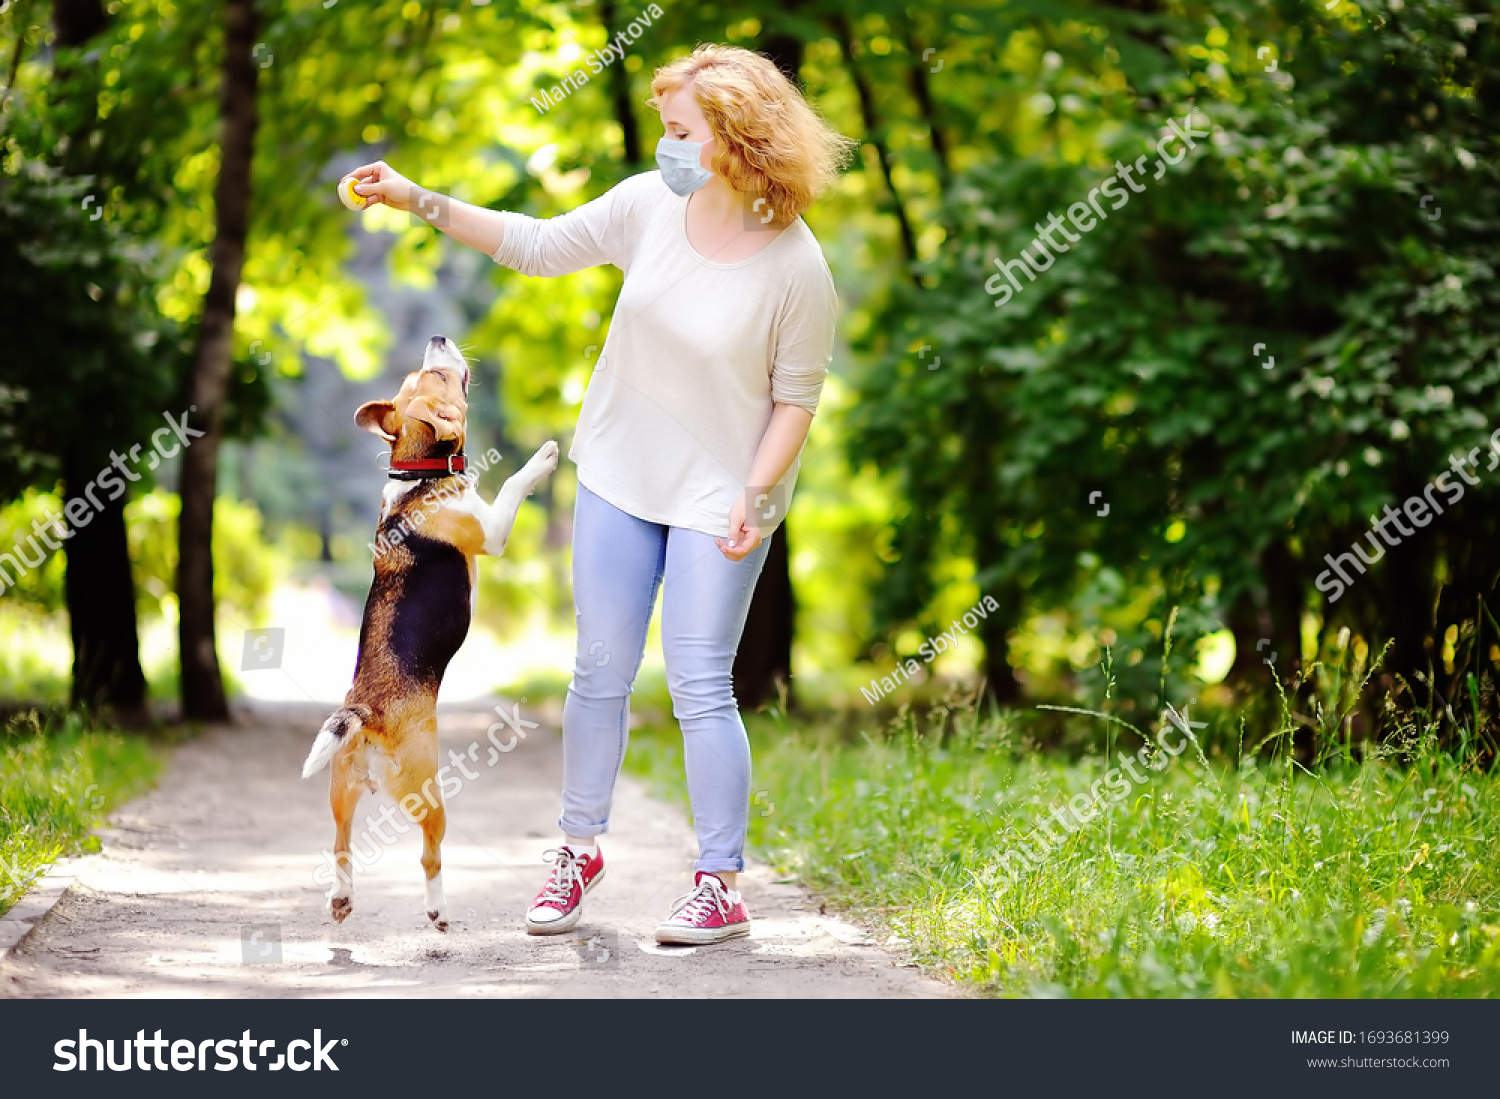 Young beautiful woman wearing disposable medical face mask playing with Beagle dog in the park during coronavirus outbreak. Walking of pets. Safety in a public place while epidemic of covid-19. #1693681399